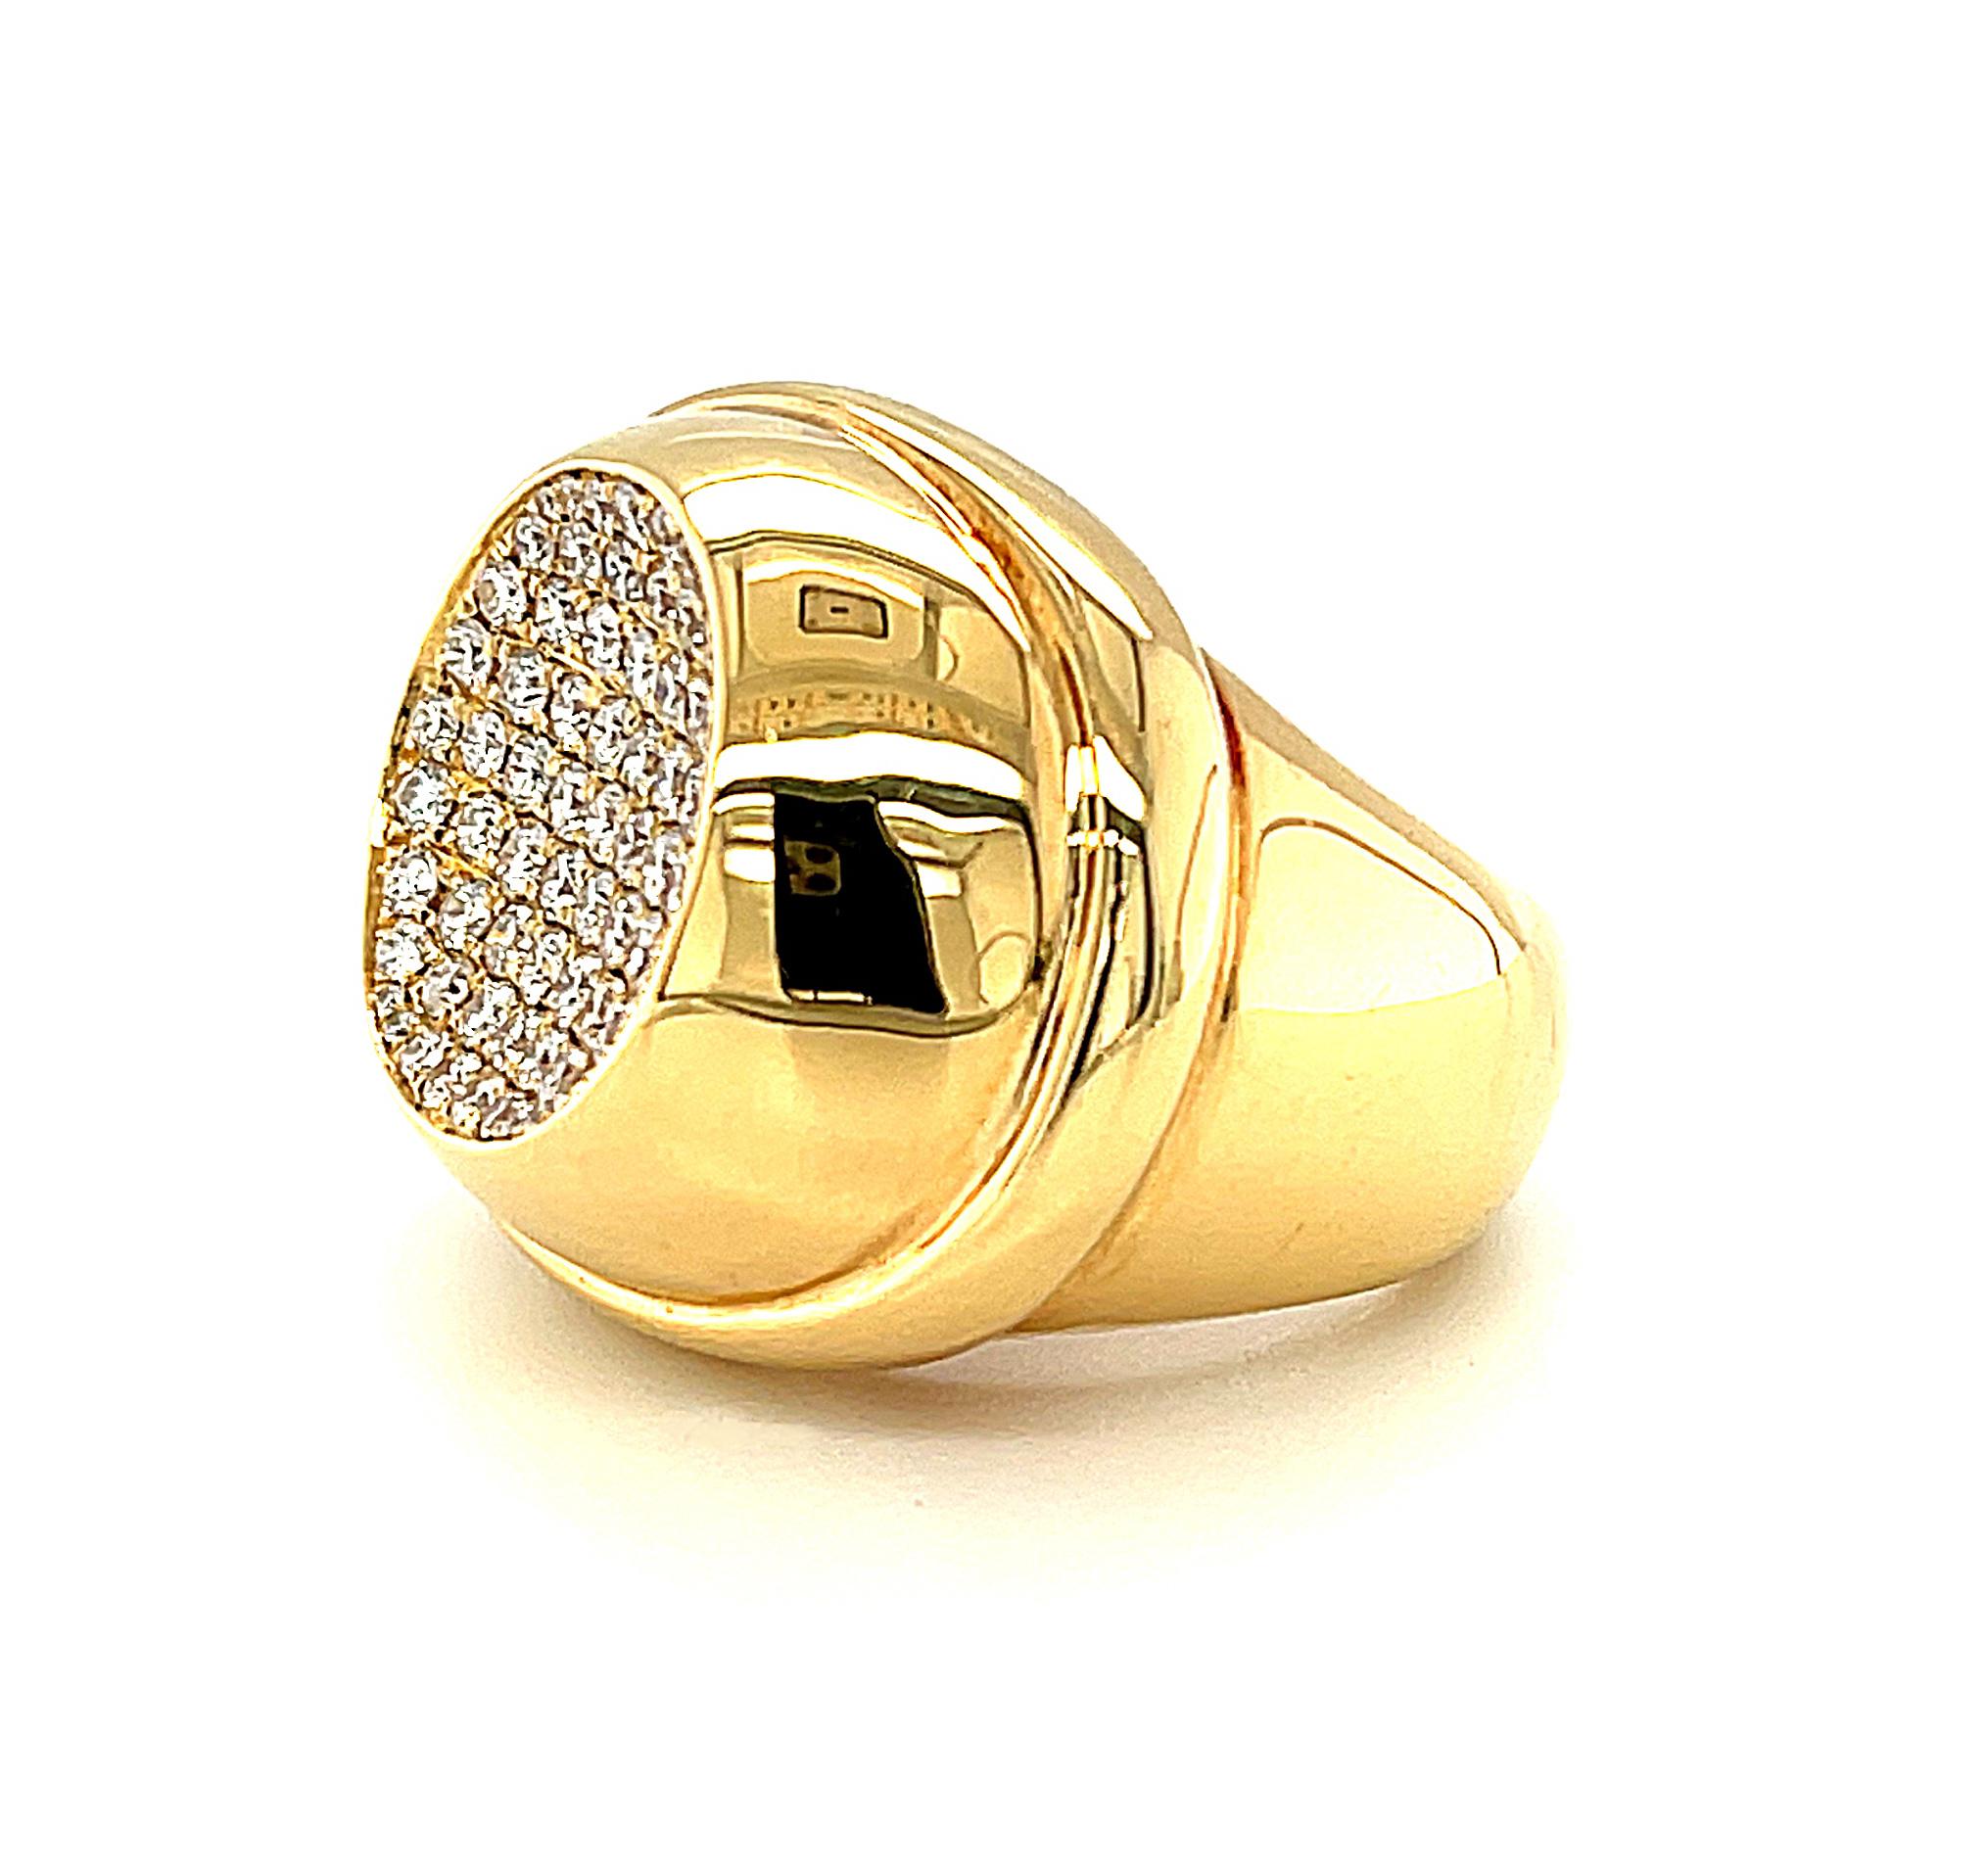 Round Cut Diamond Pave Ring in 18k Yellow Gold, 1.94 Carat Total For Sale